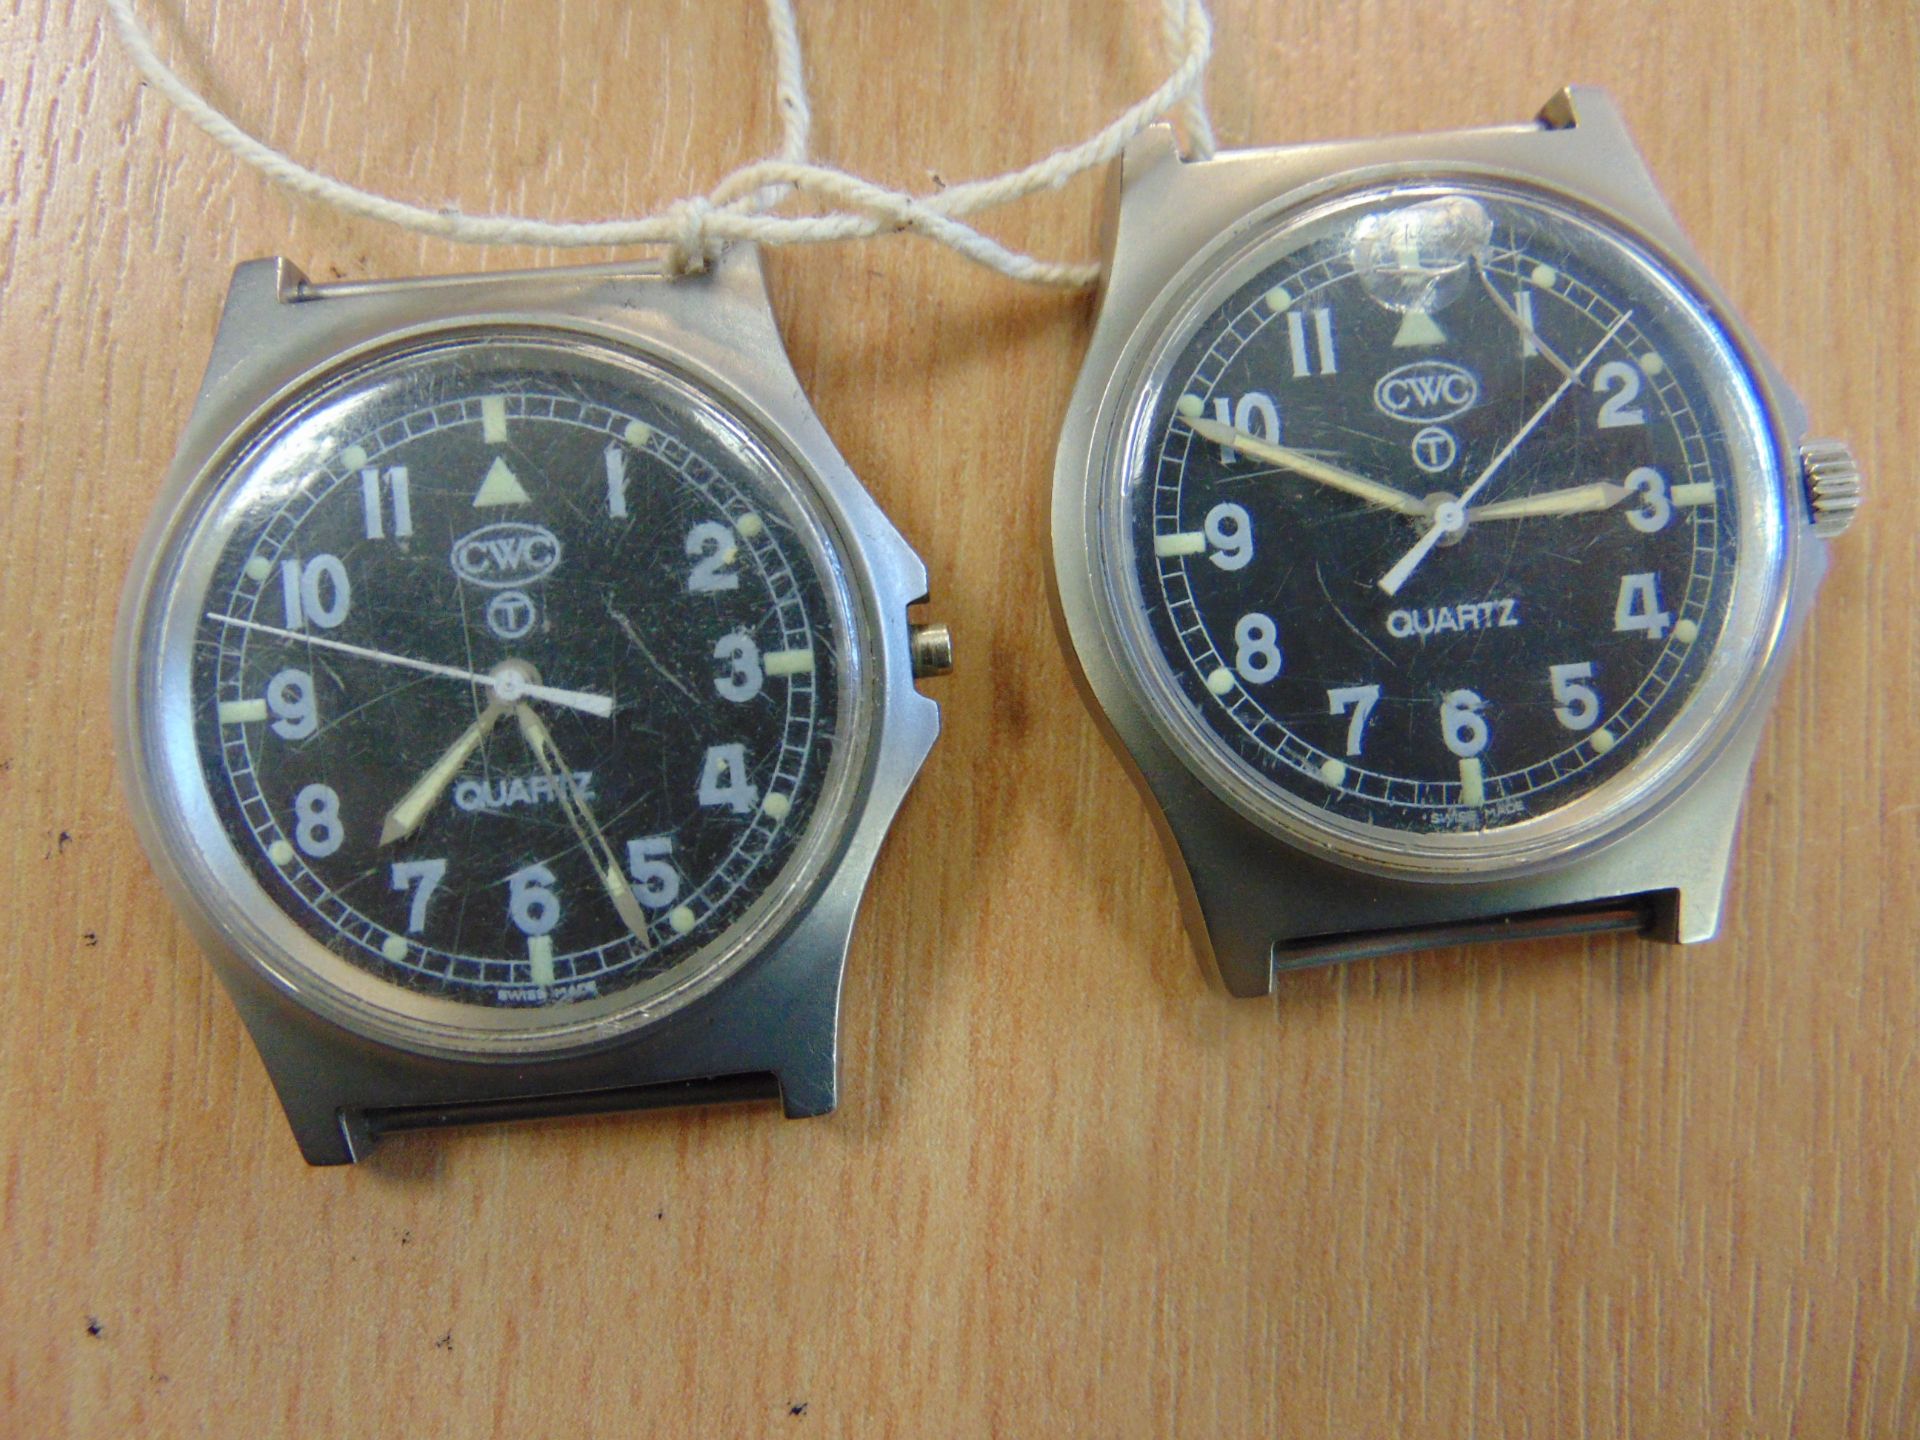 2X CWC 0552 ROYAL MARINES ISSUE SERVICE WATCHES NATO MARKED DATED 1990